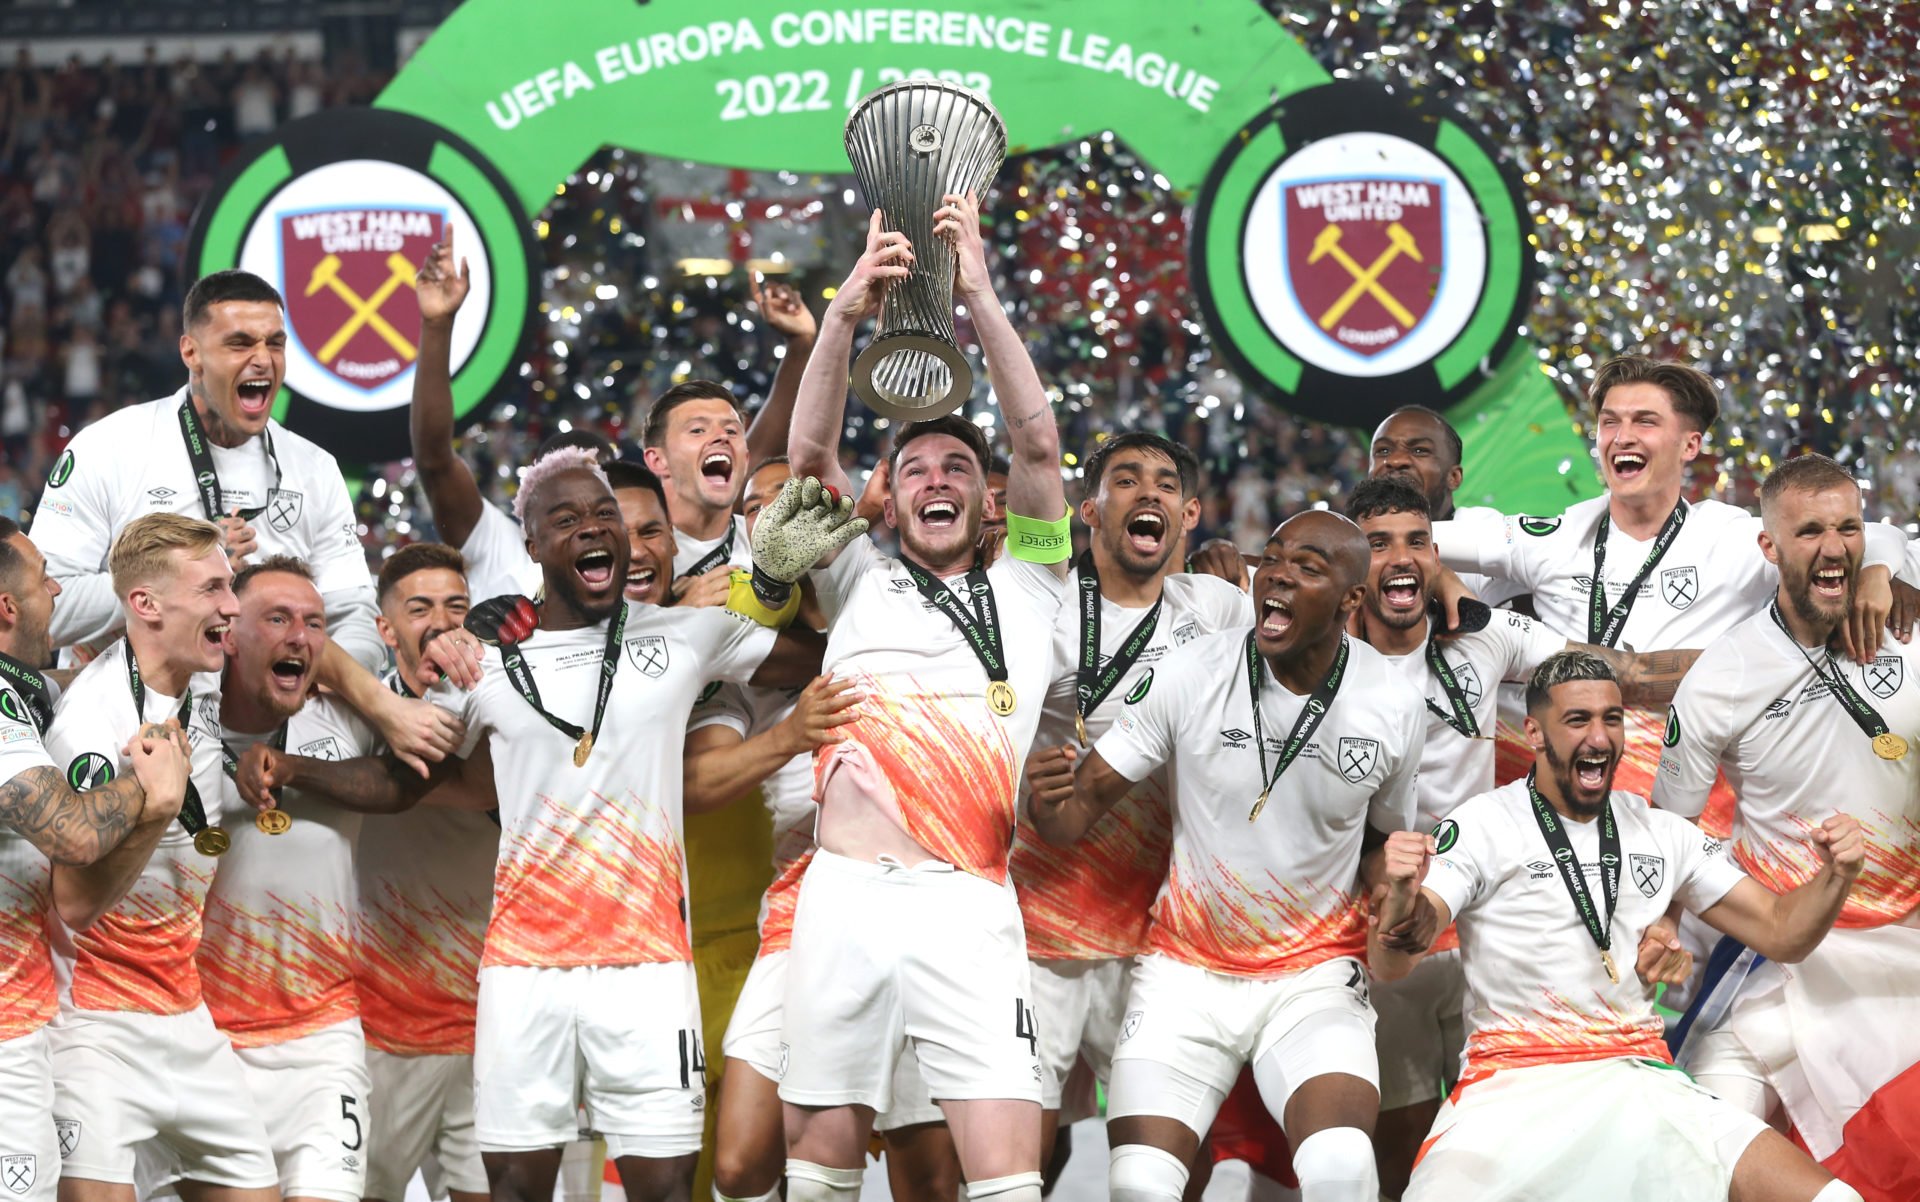 West Ham confirm details, timings and route for Europa Conference League trophy parade